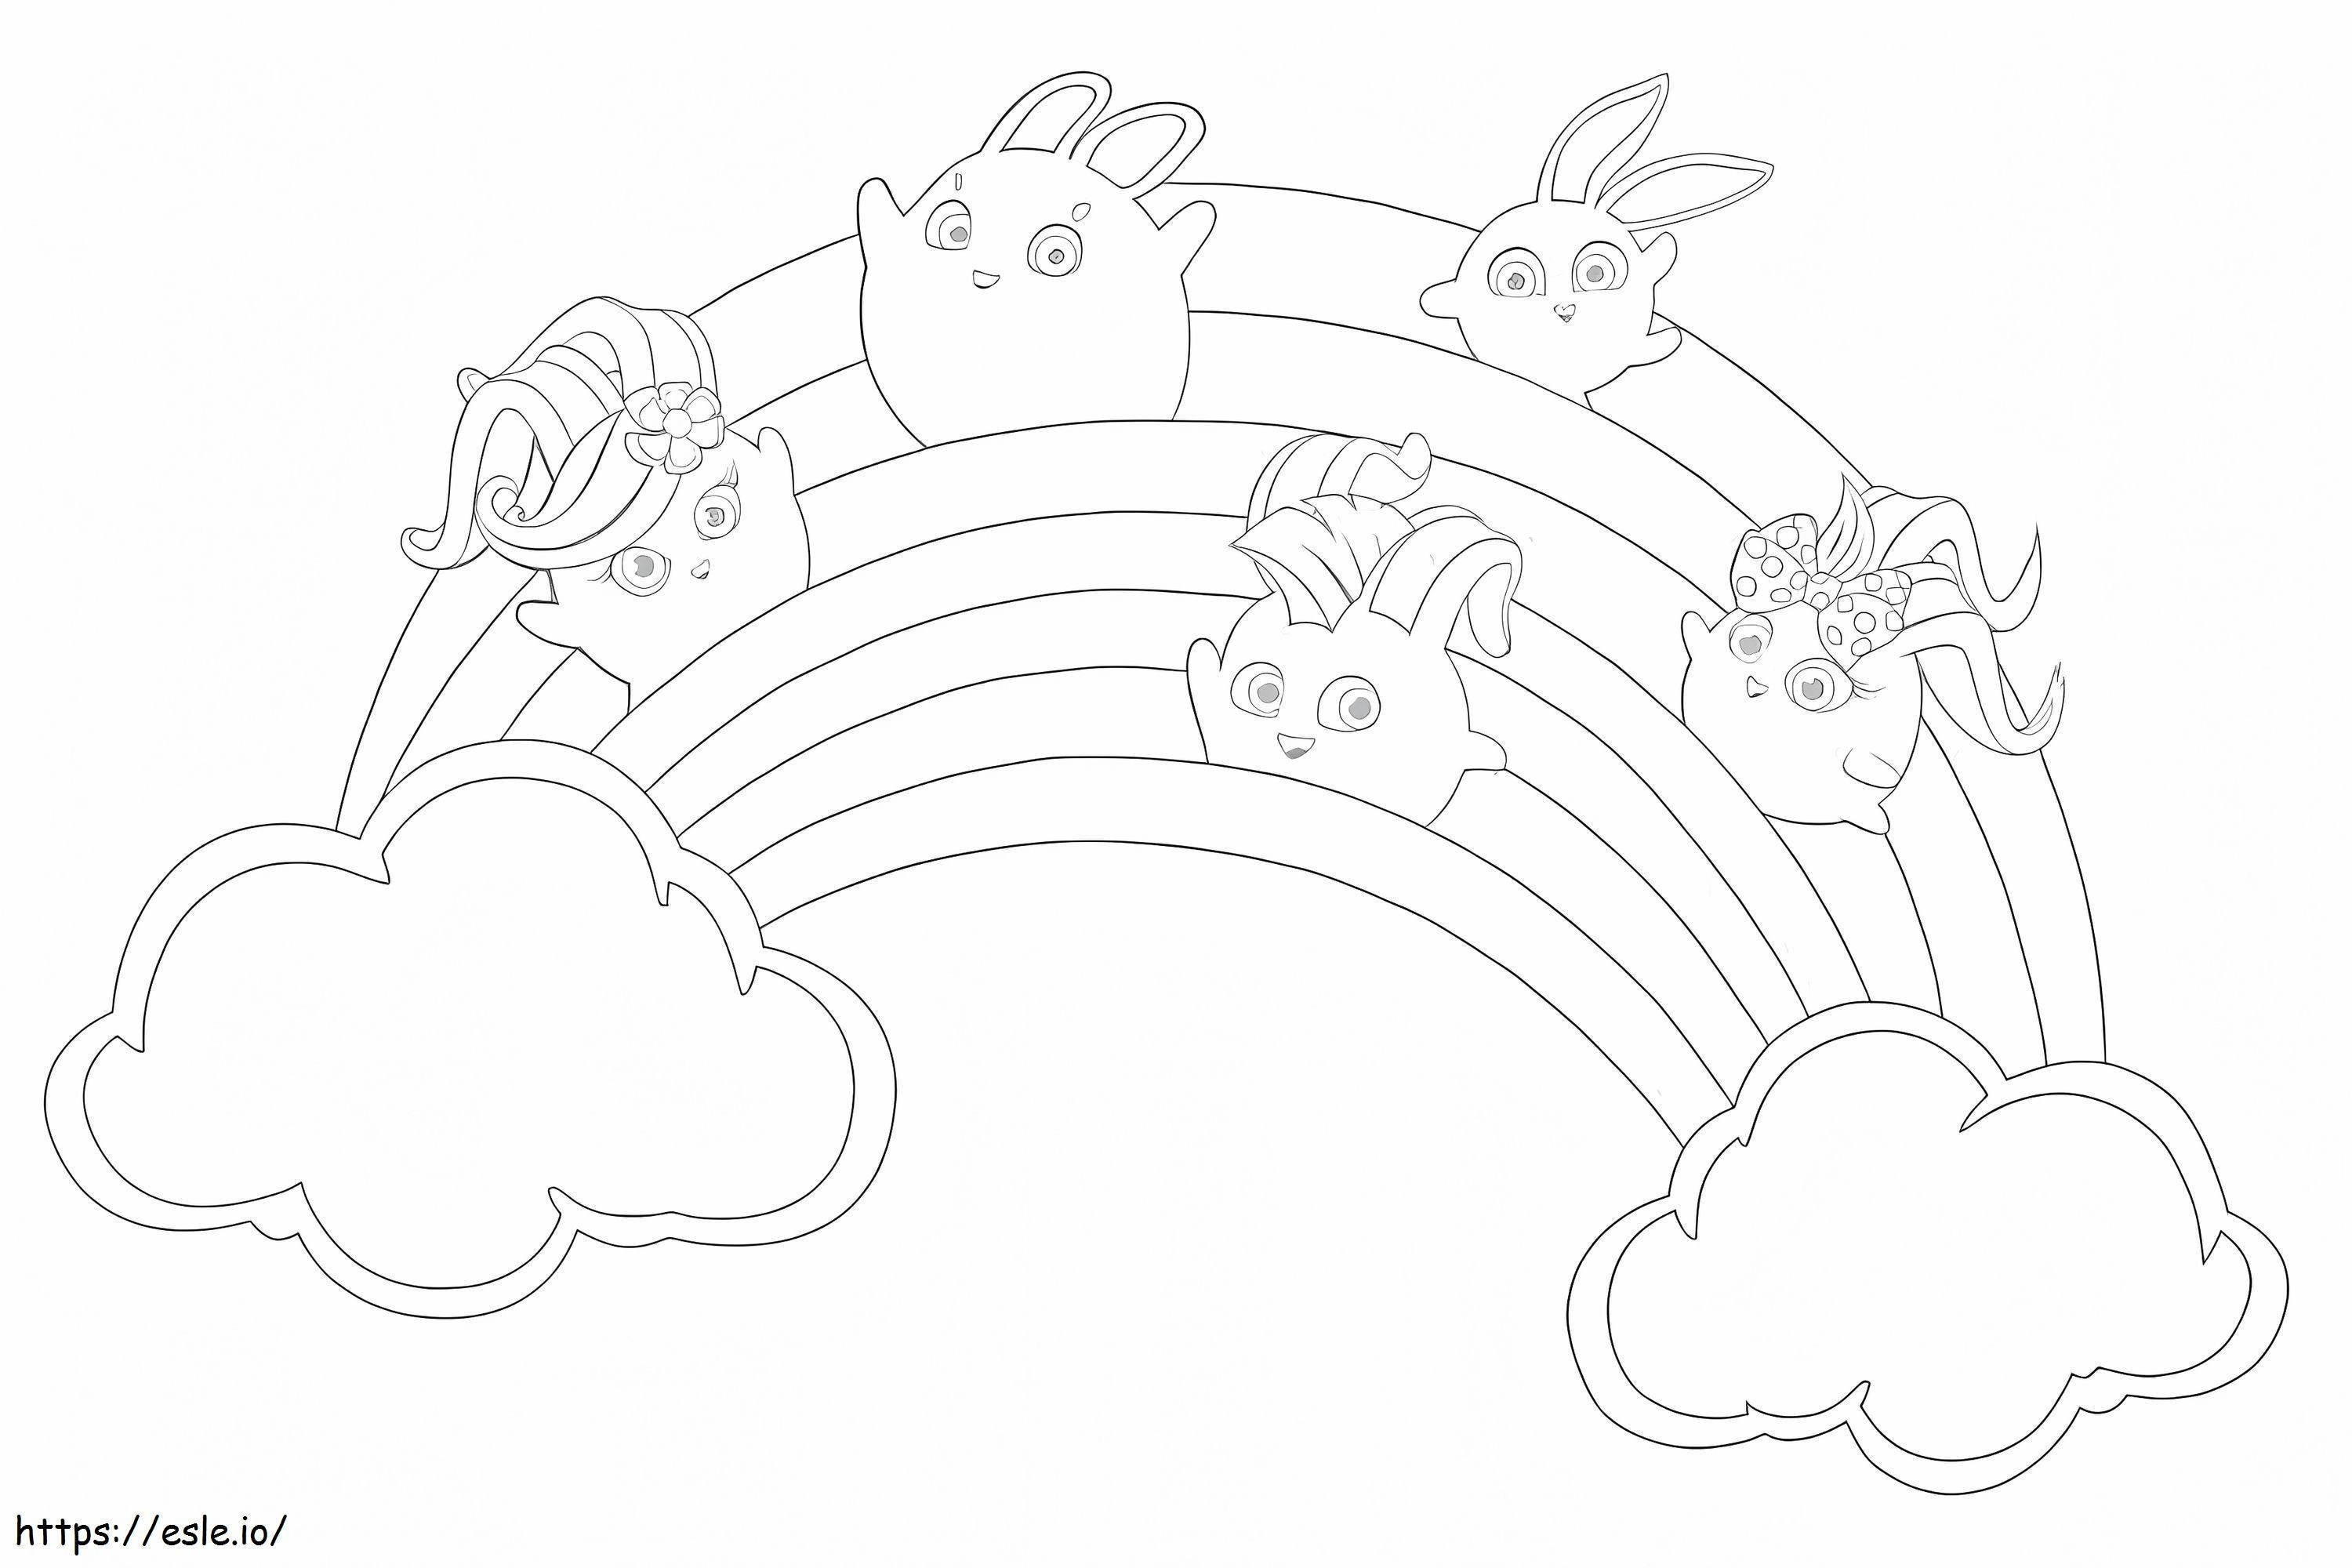 Rainbow Sunny Bunnies coloring page